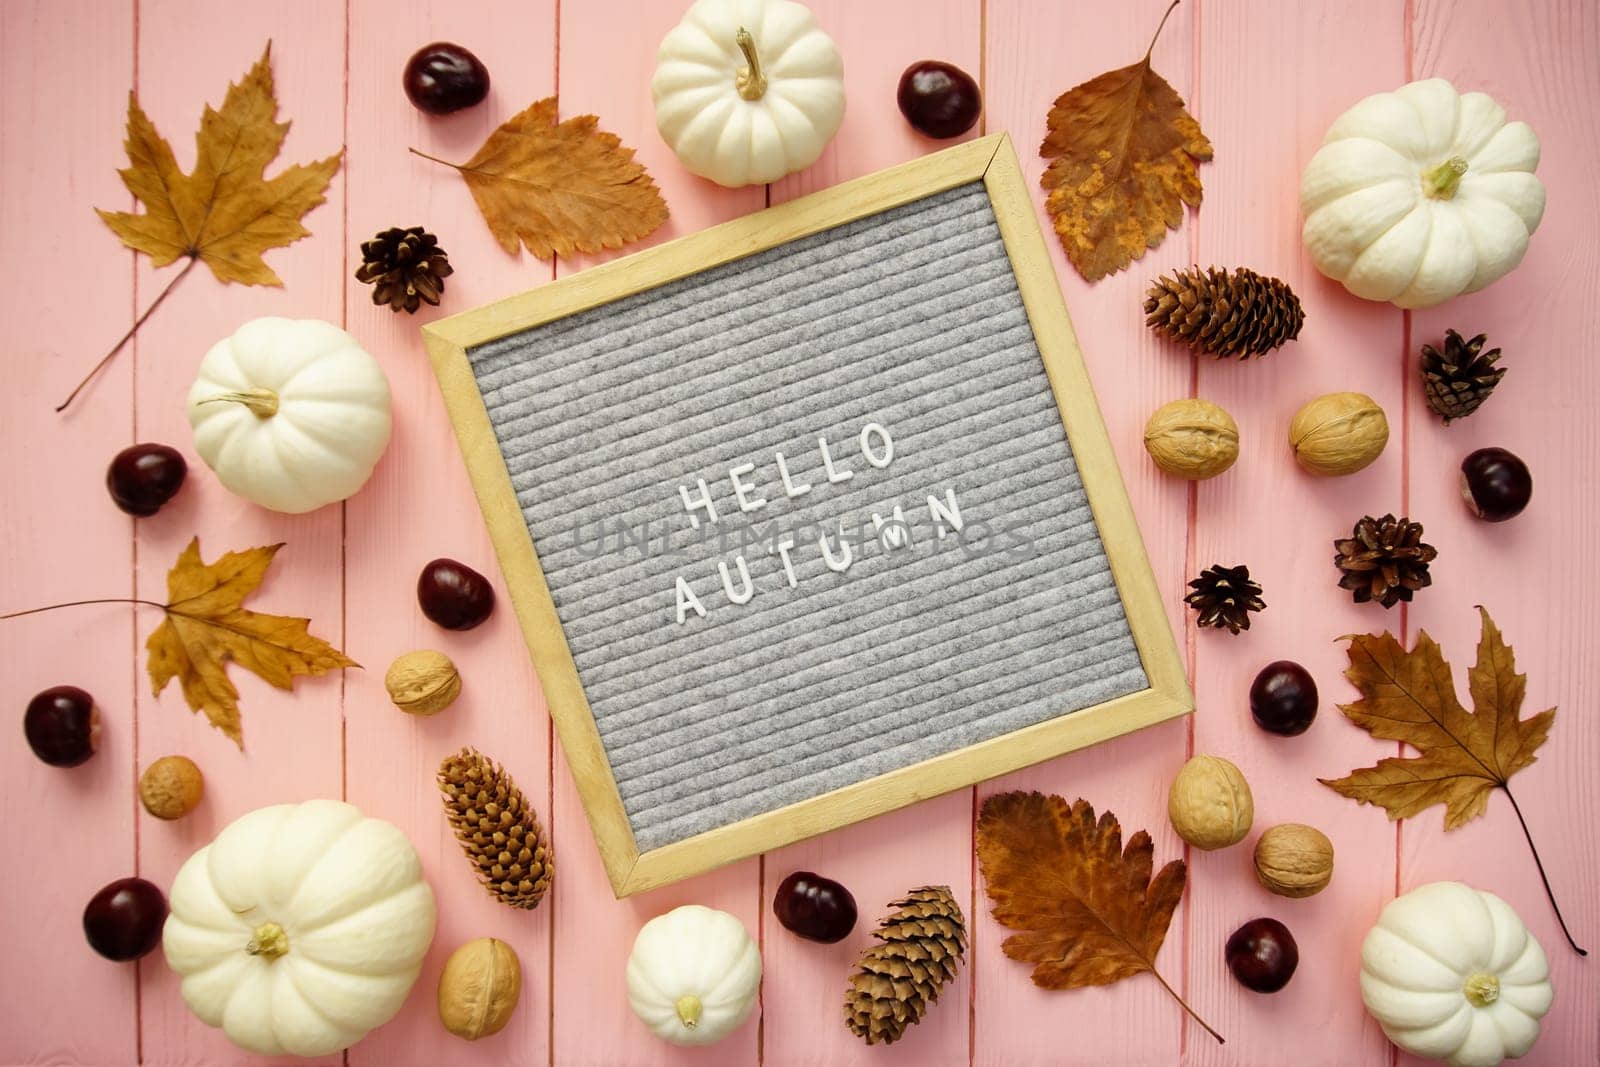 In the frame the inscription Hello autumn and autumn decor elements by Spirina